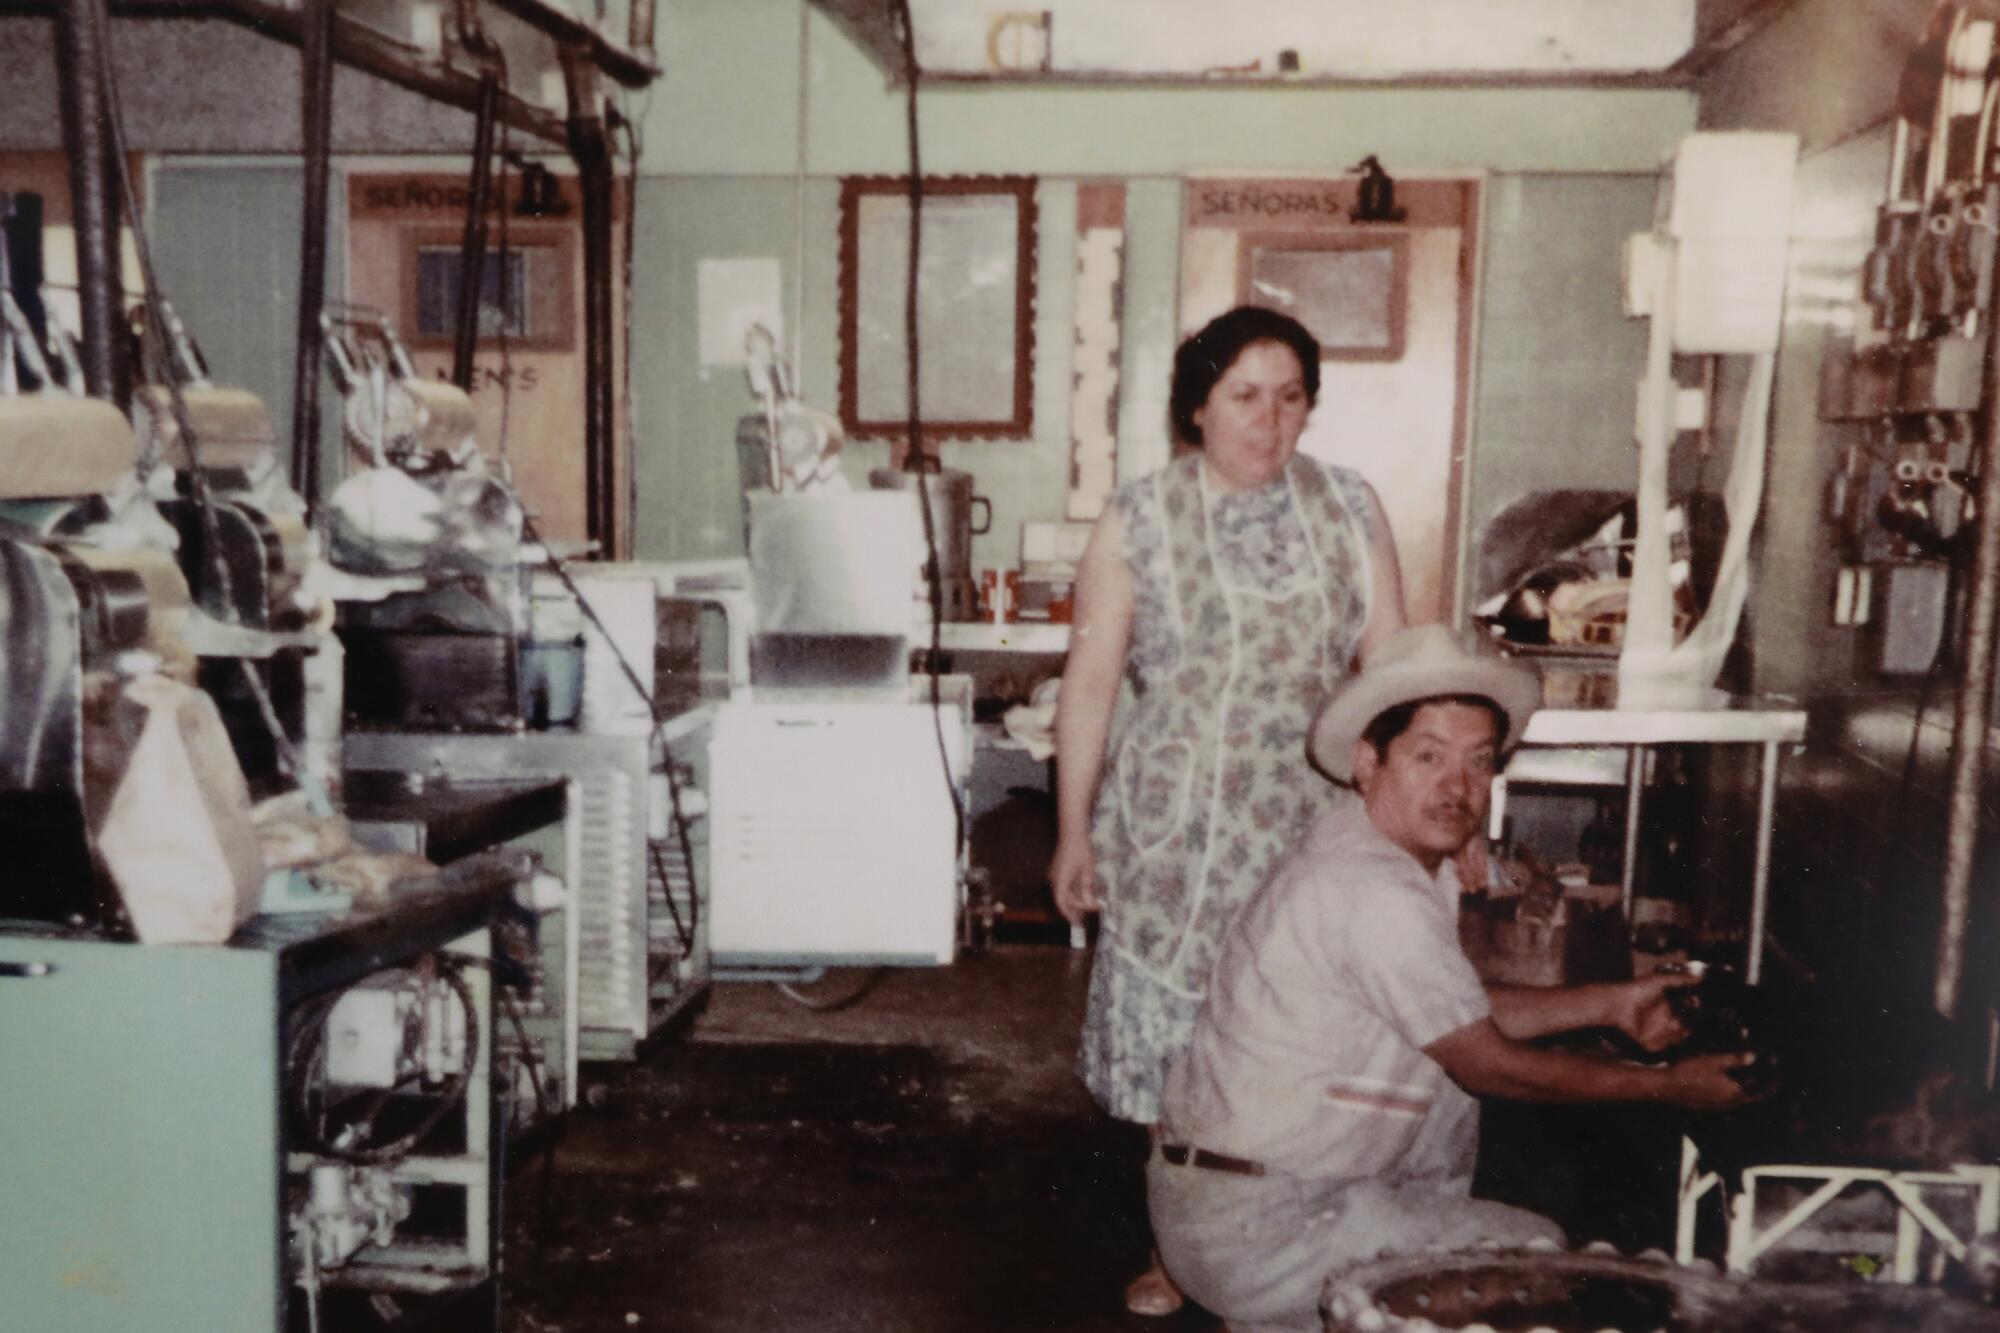 Old photo of a man and a woman in a factory space.